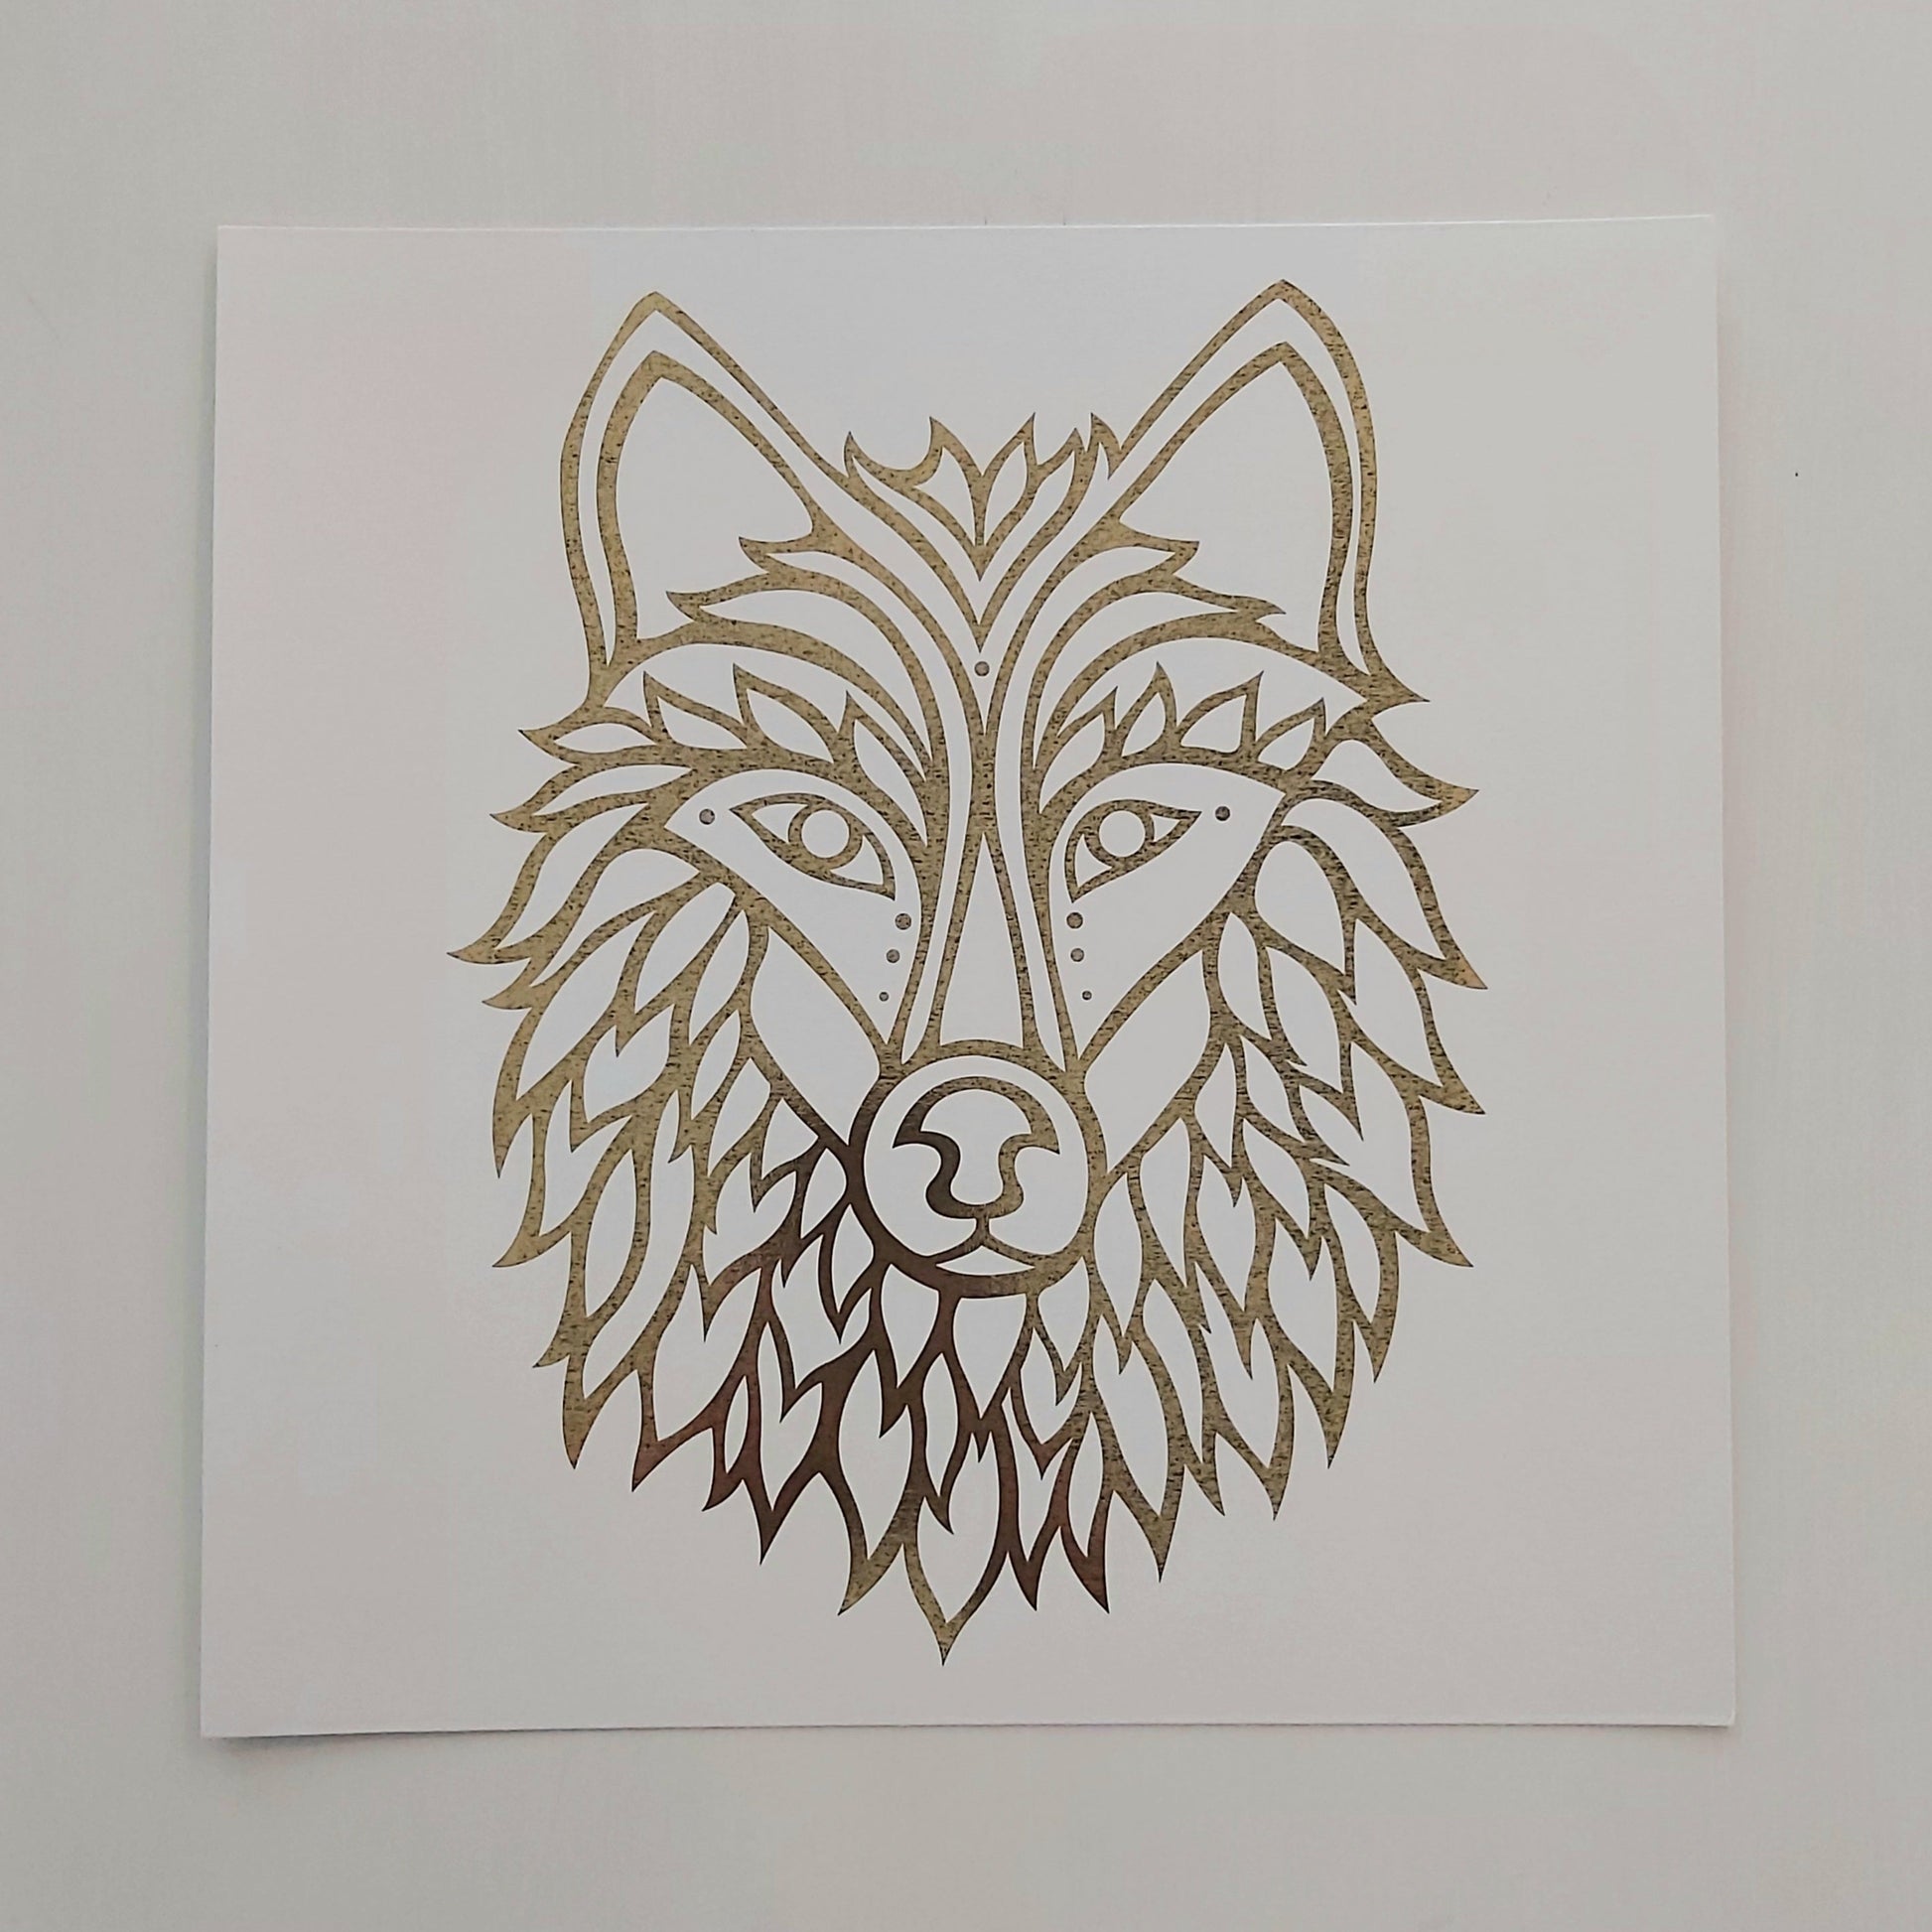 Print of Patrick Hunter's painting of a wolf, gold leaf on white, woodland art style.